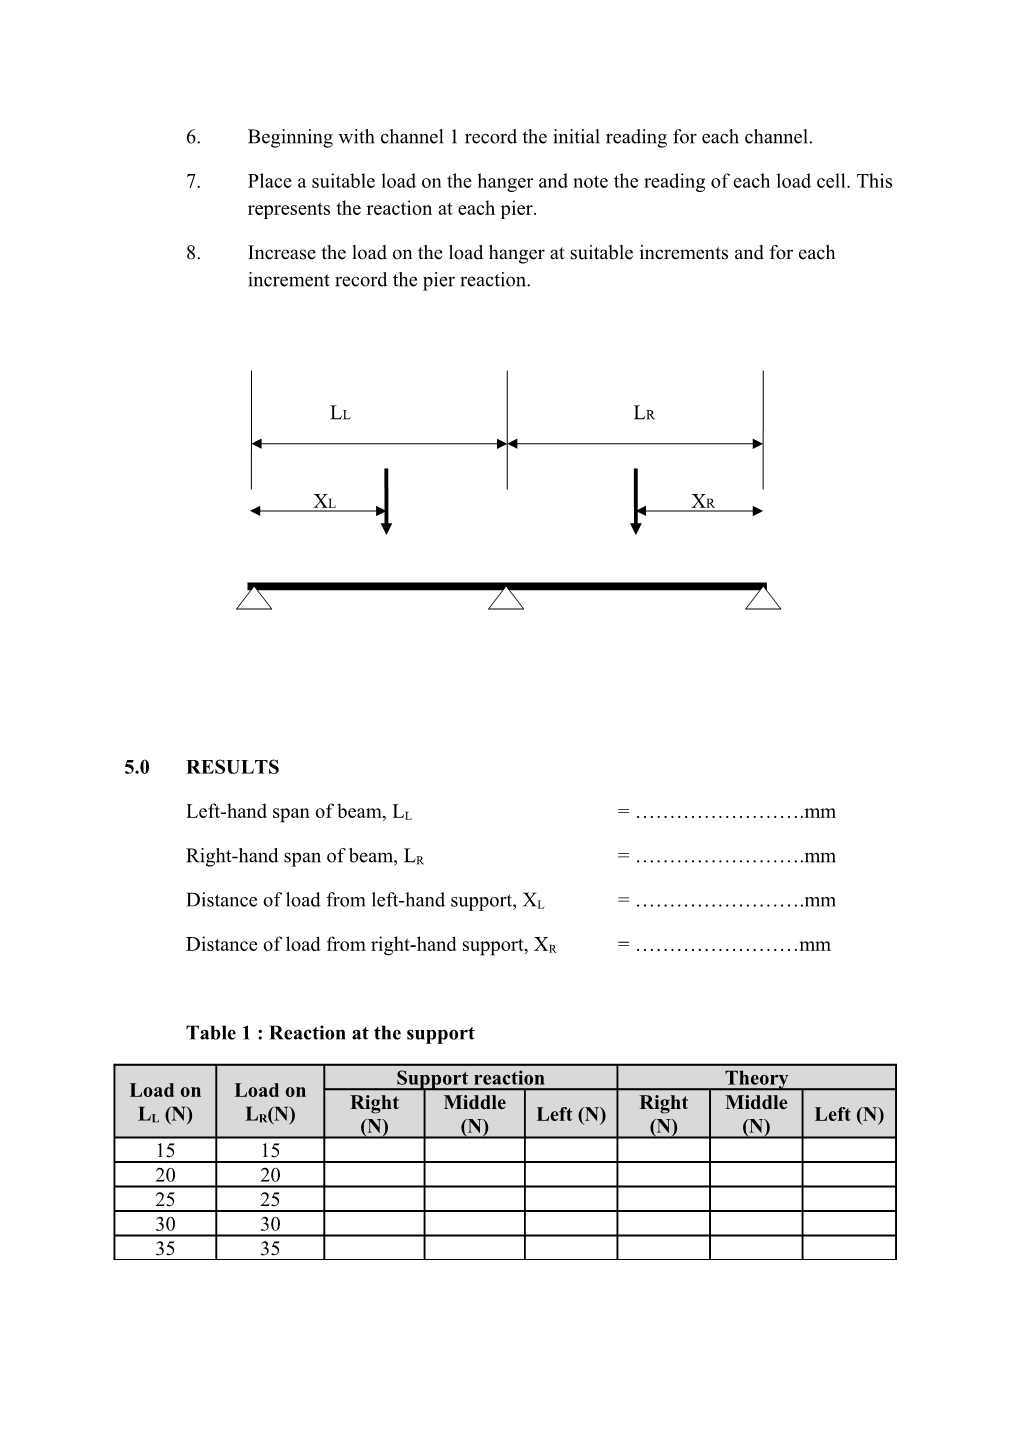 To Determine the Reactions of a Two-Span Continuous Beam